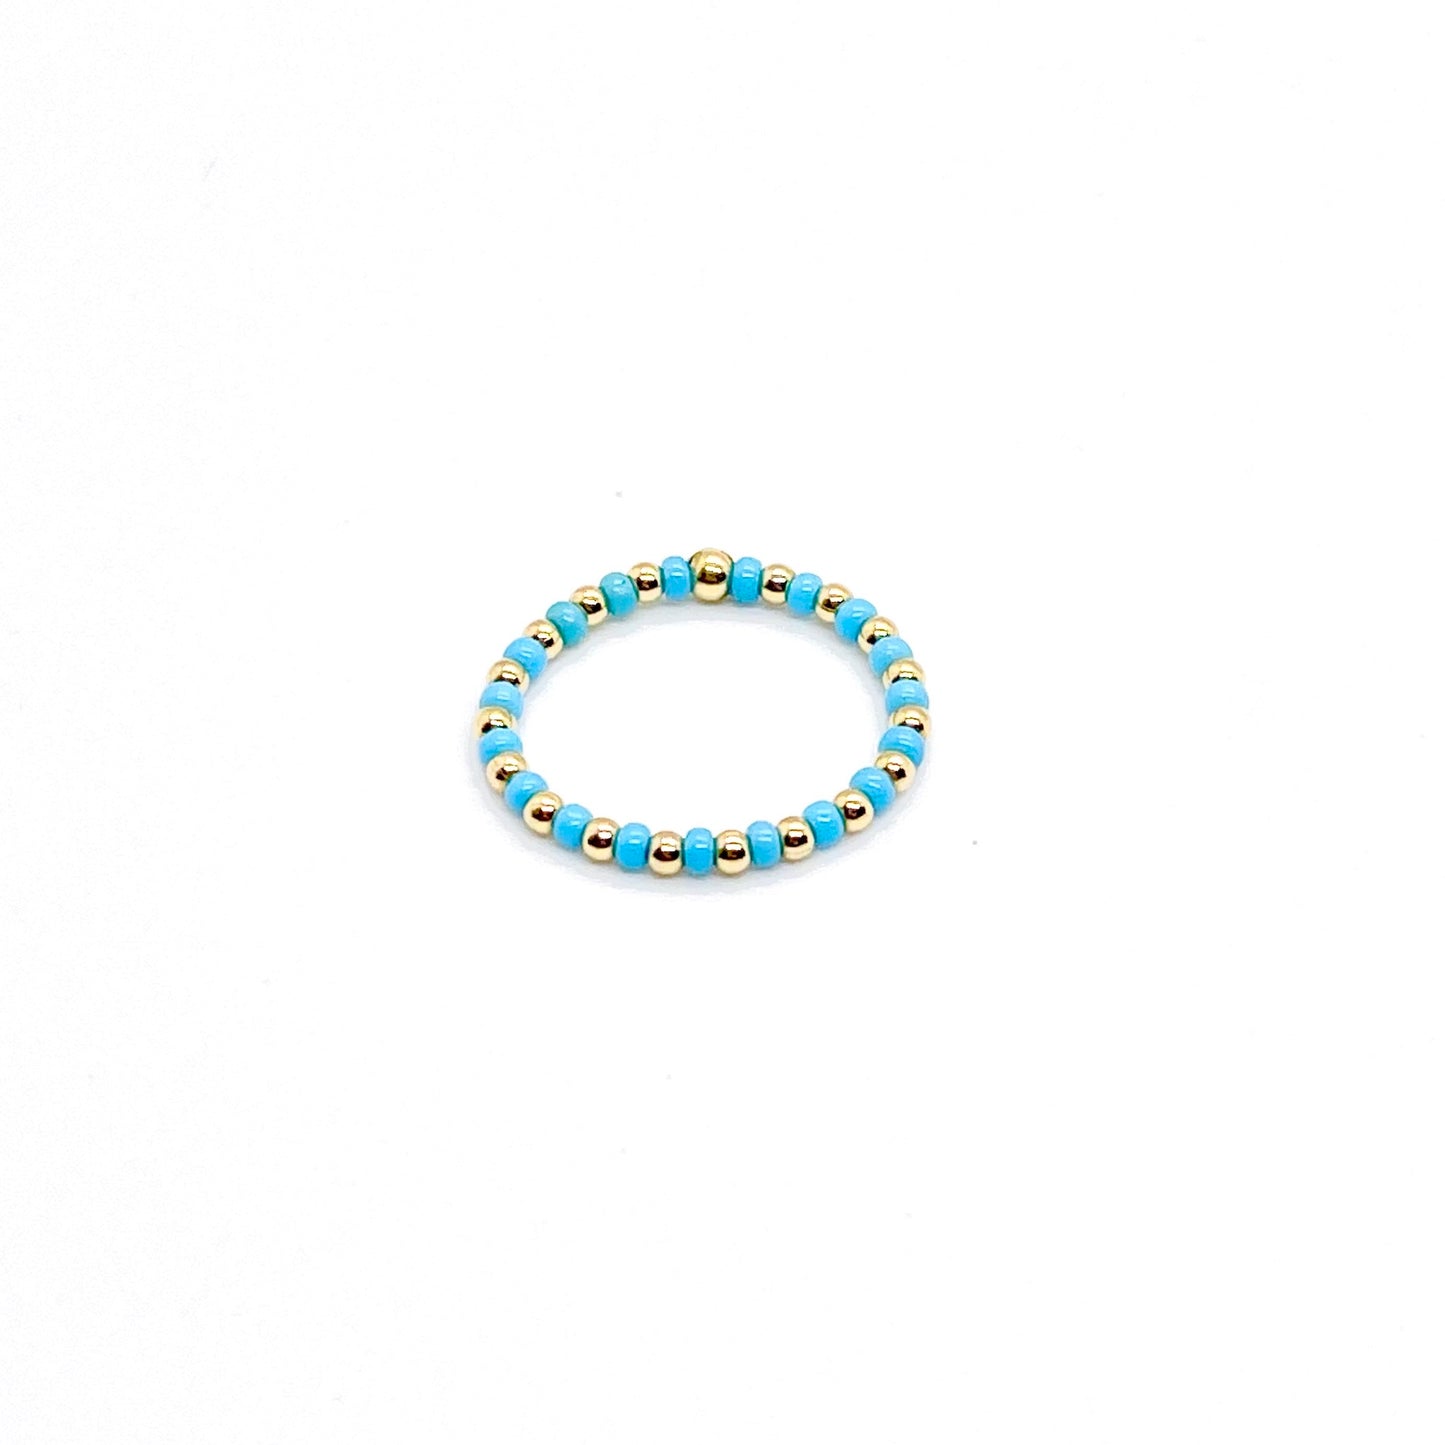 Seed bead ring | 2mm gold ball ring with alternating blue seed beads on stretch cord.